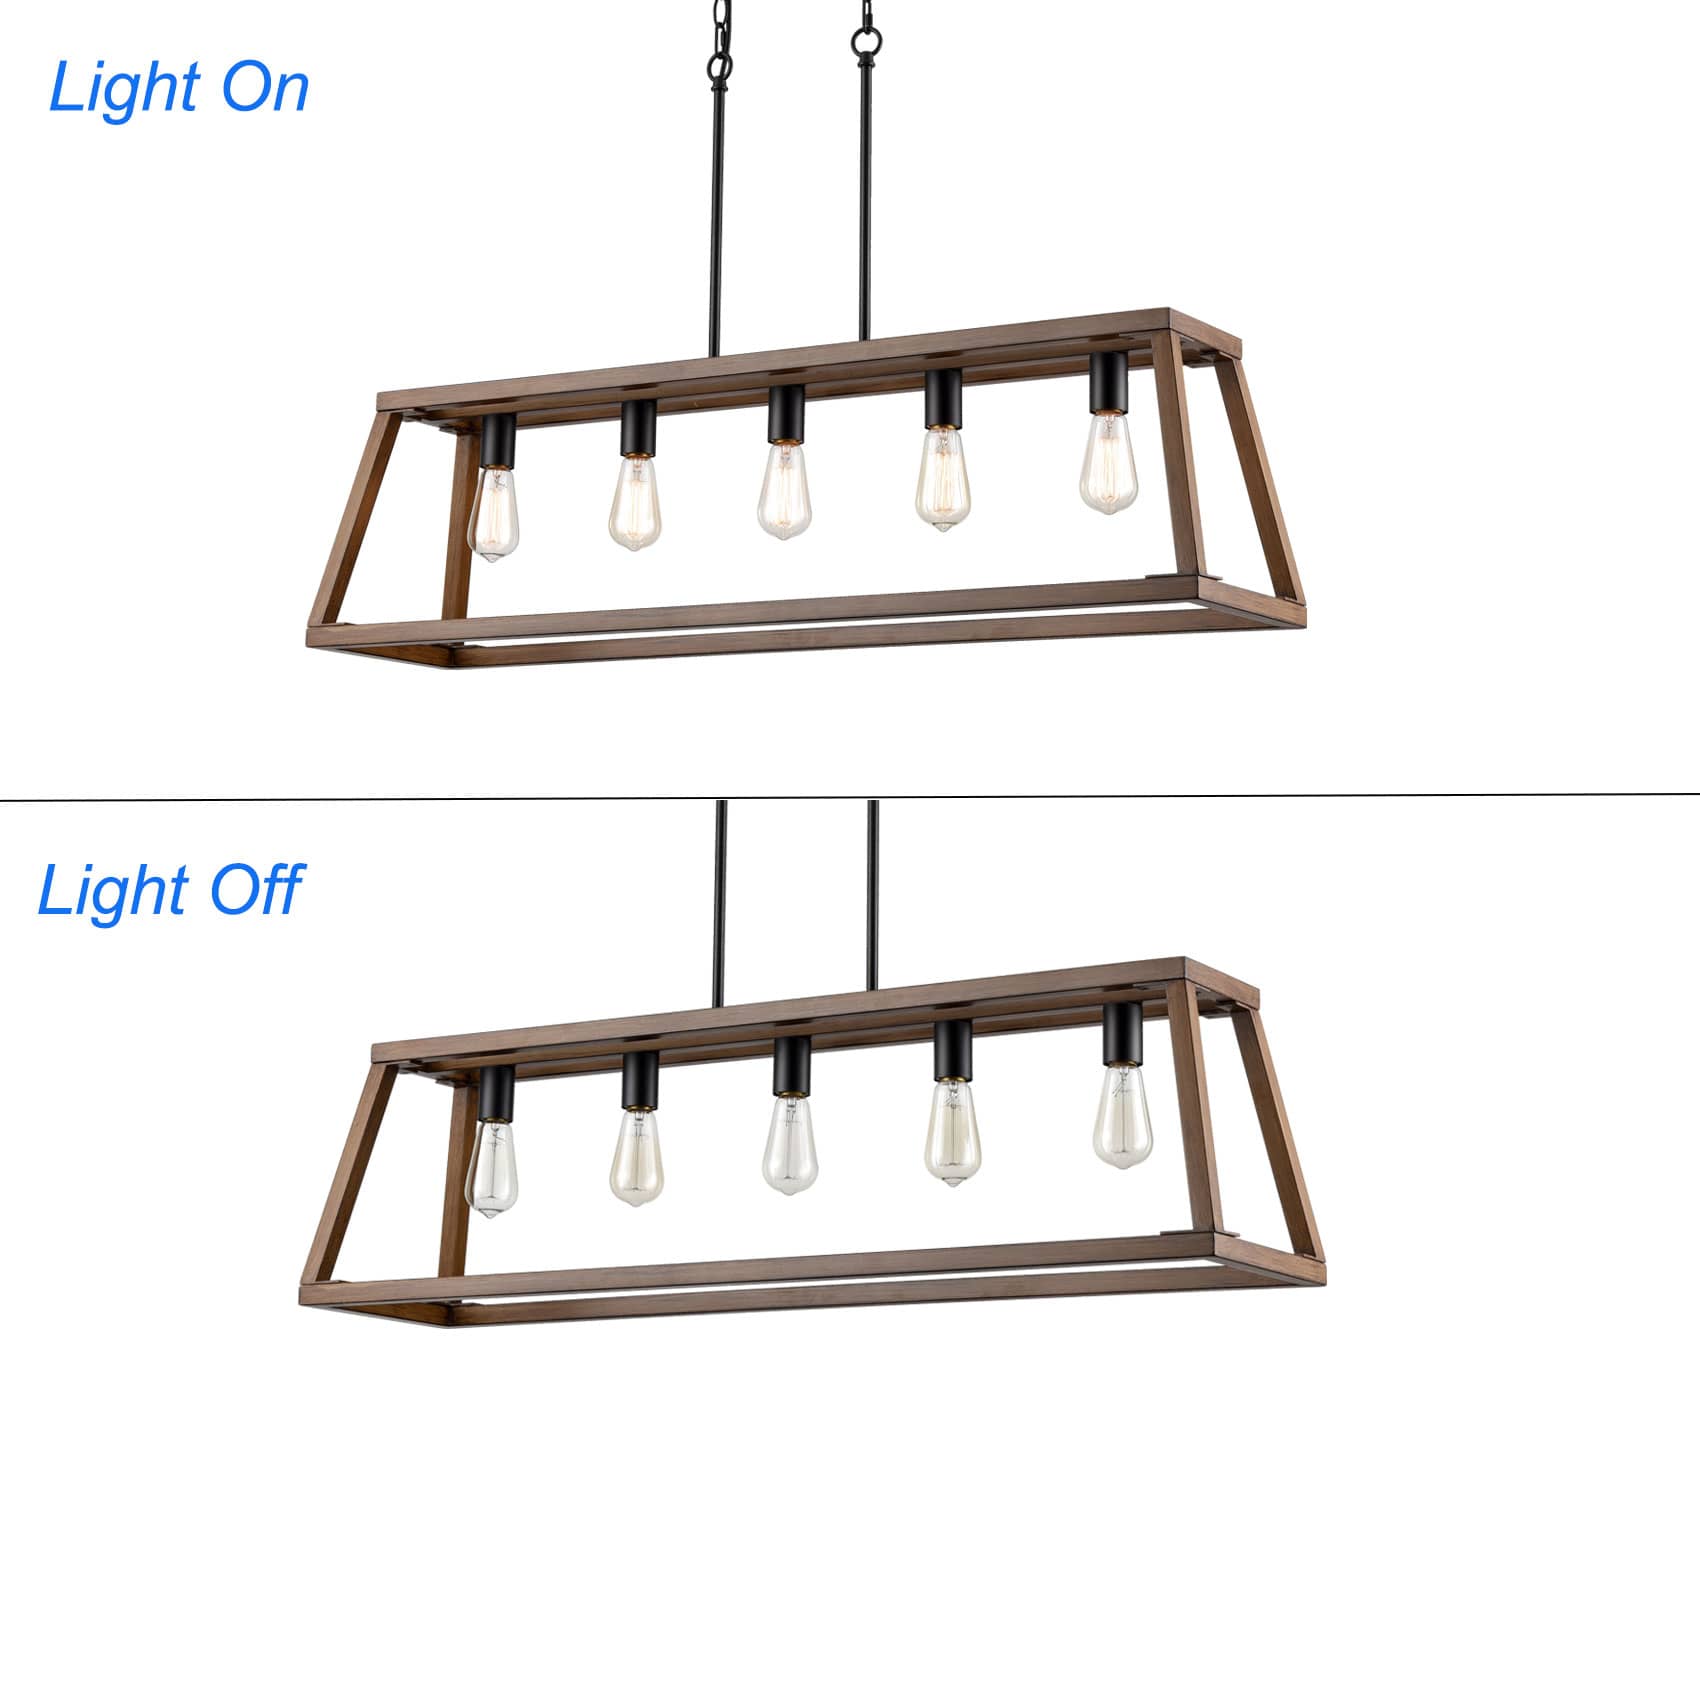 Farmhouse 5-Light Chandeliers for Dining Room Rustic Wood Grain Finish